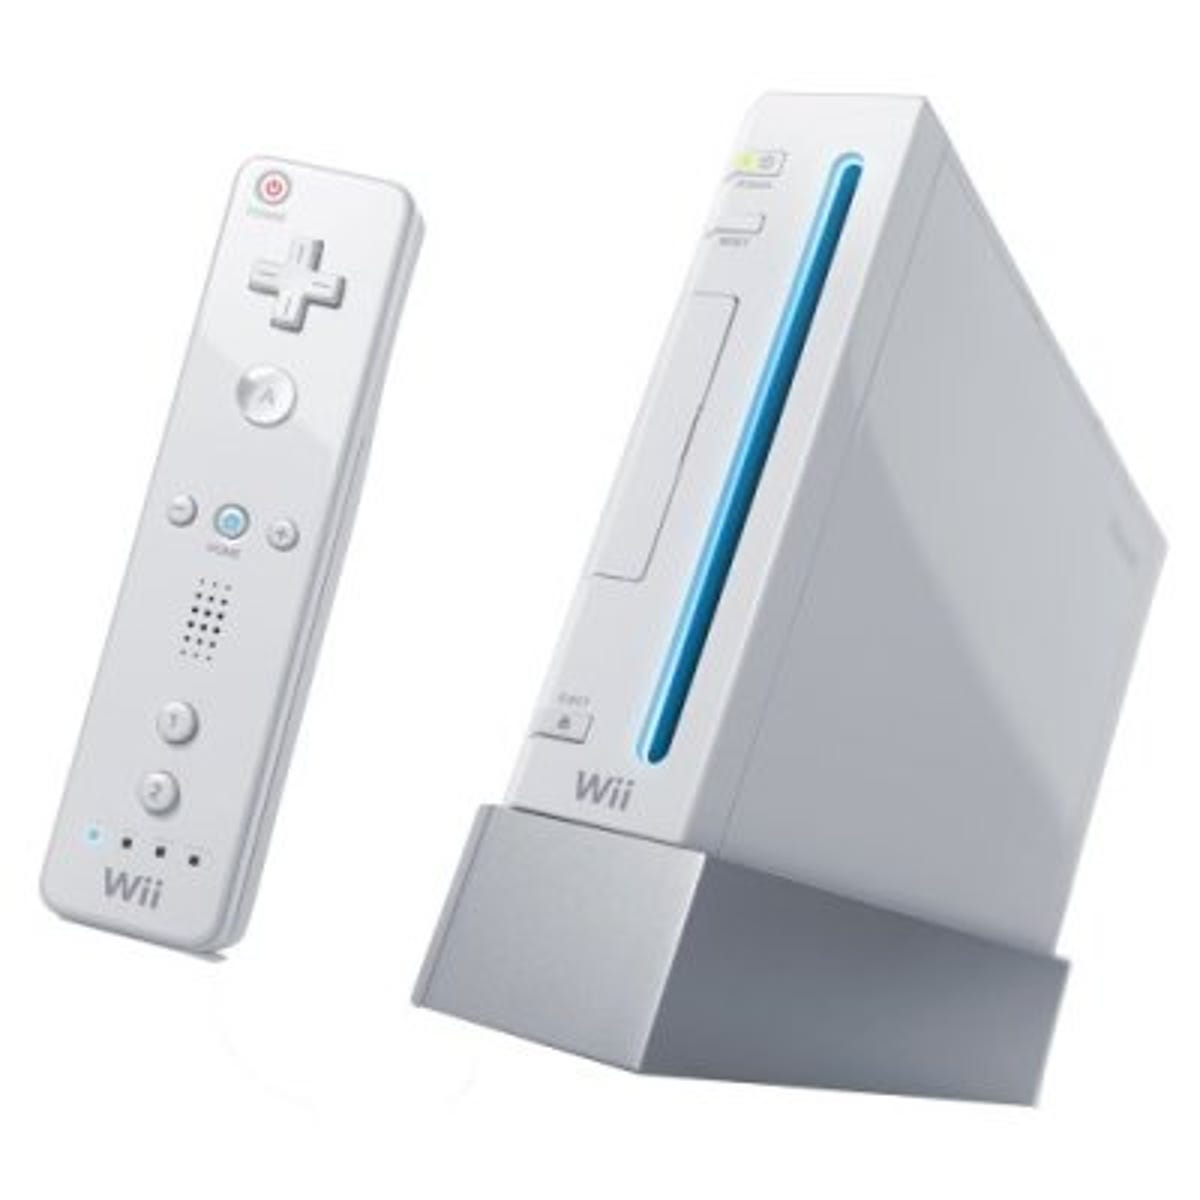 Wii And Fit Make Their Way To